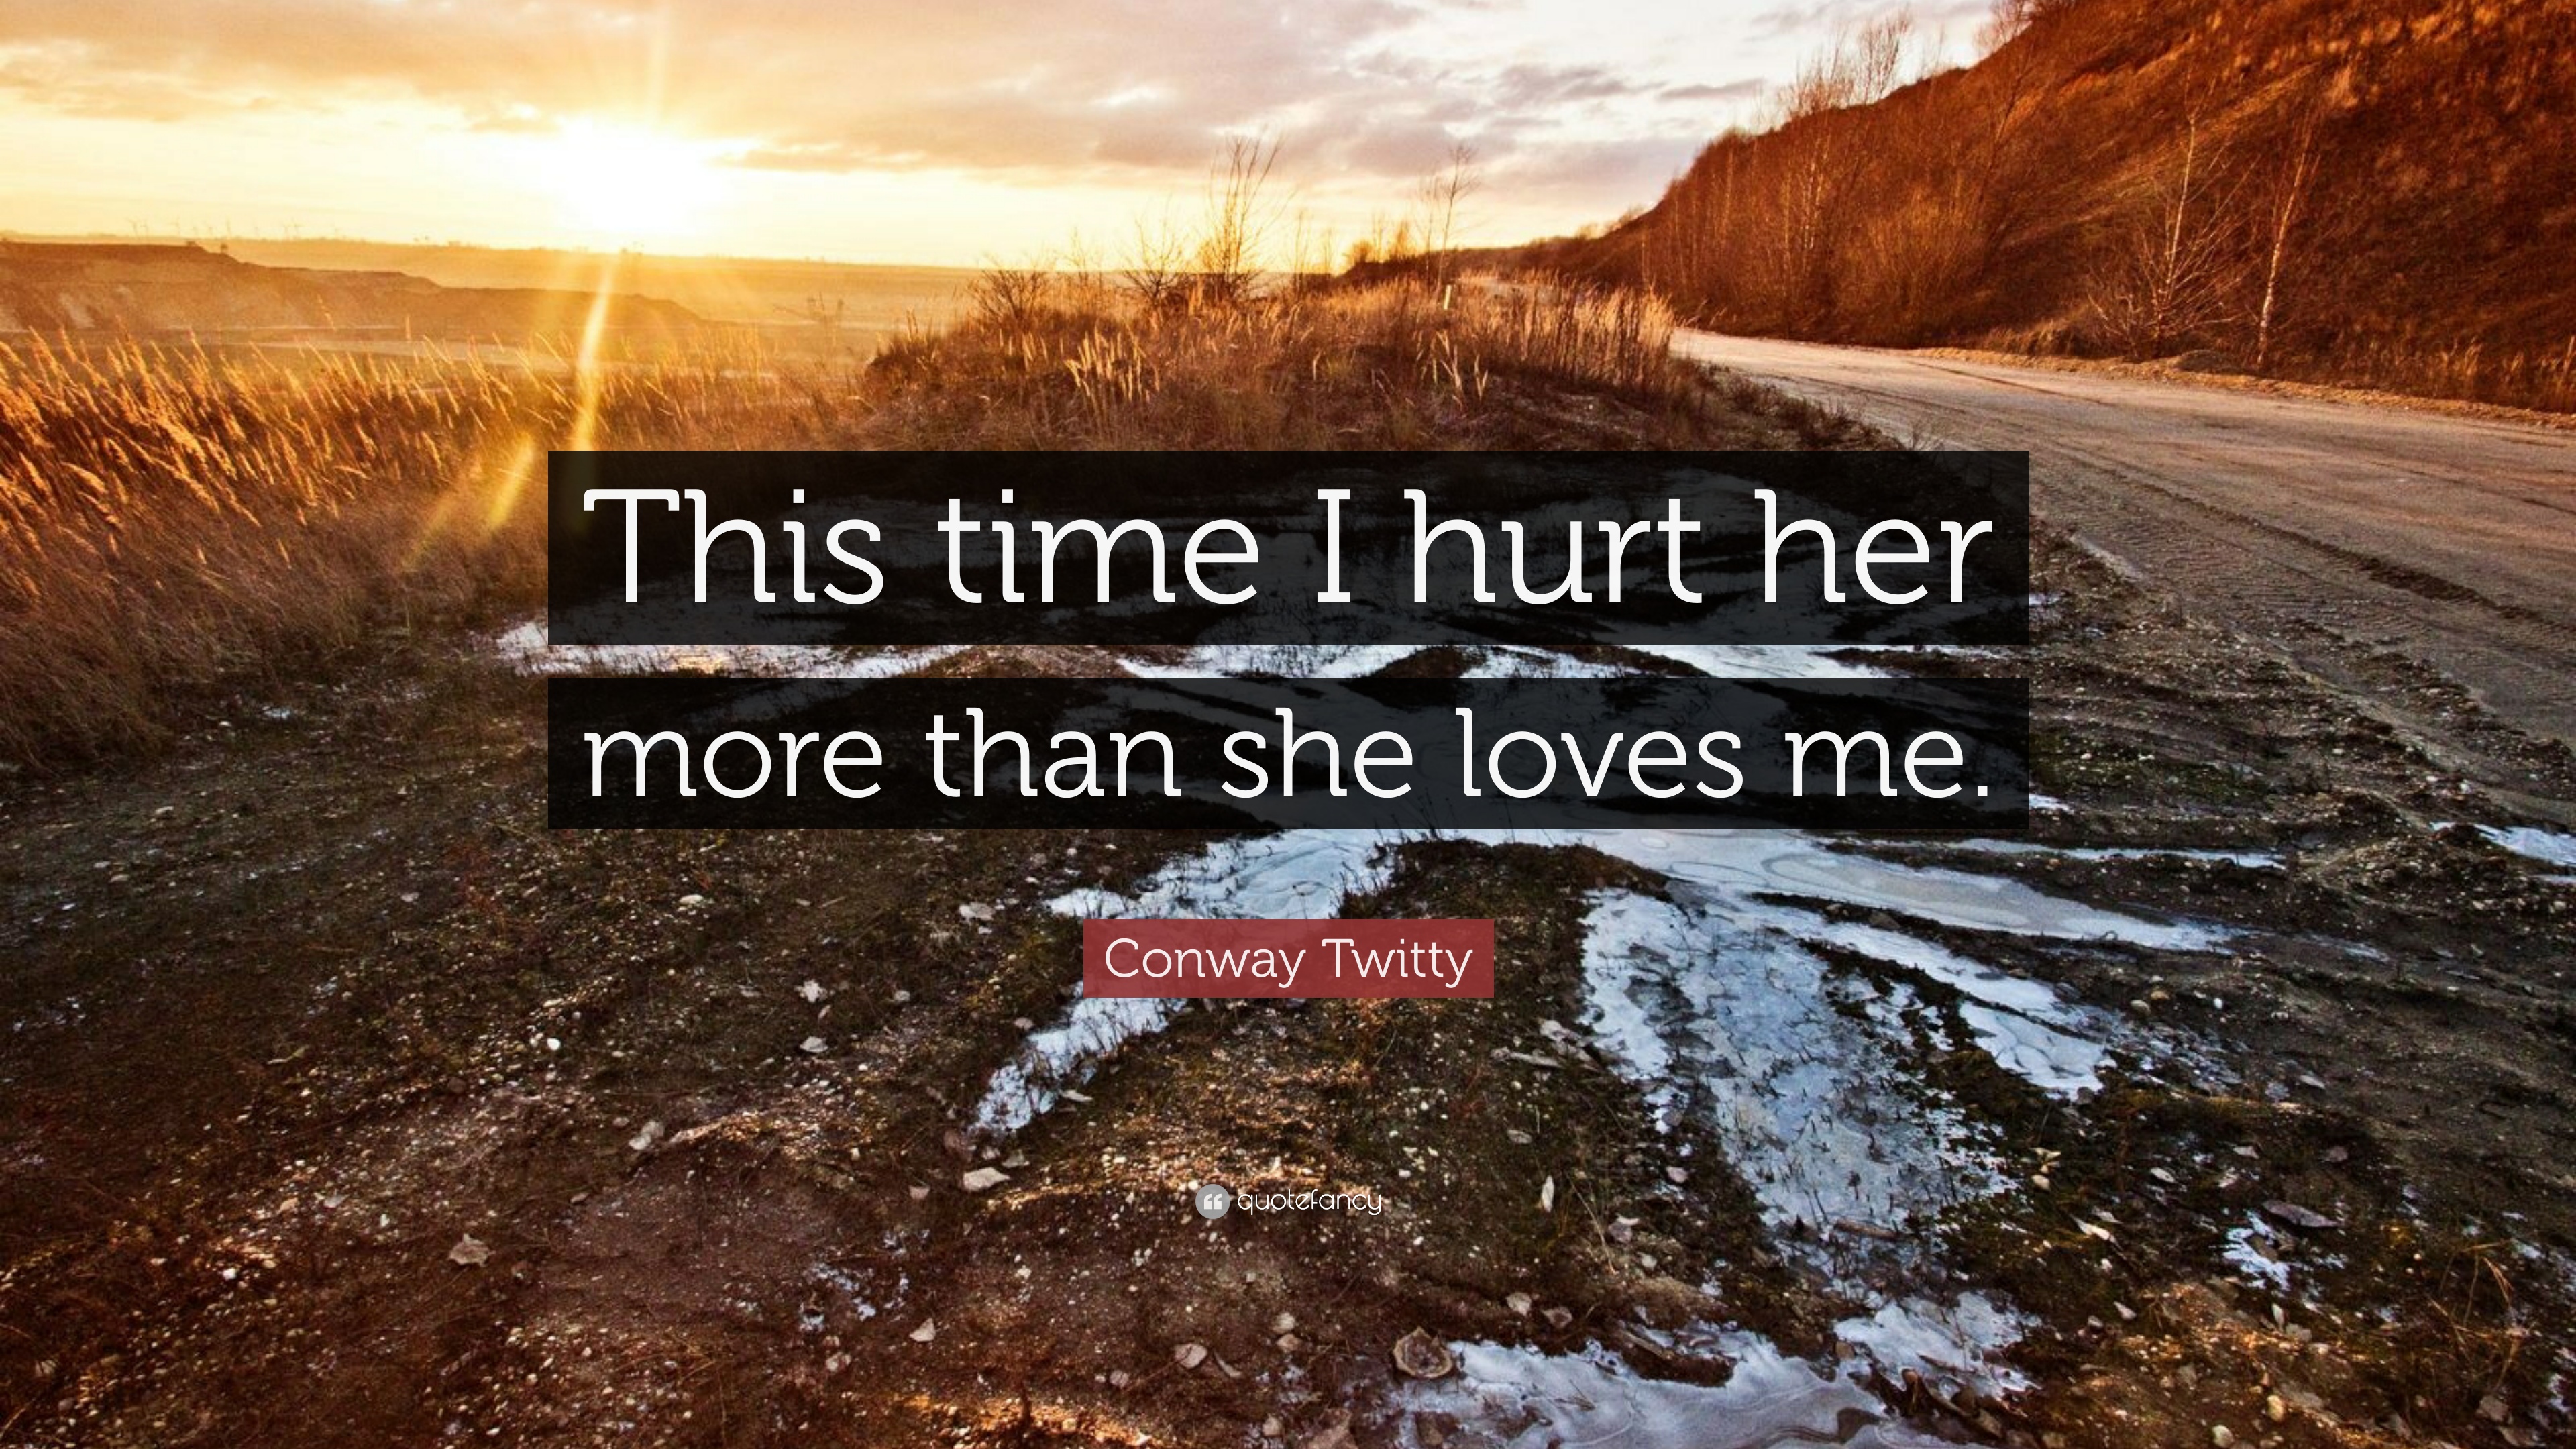 Conway Twitty Quote: “This time I hurt her more than she loves me.”